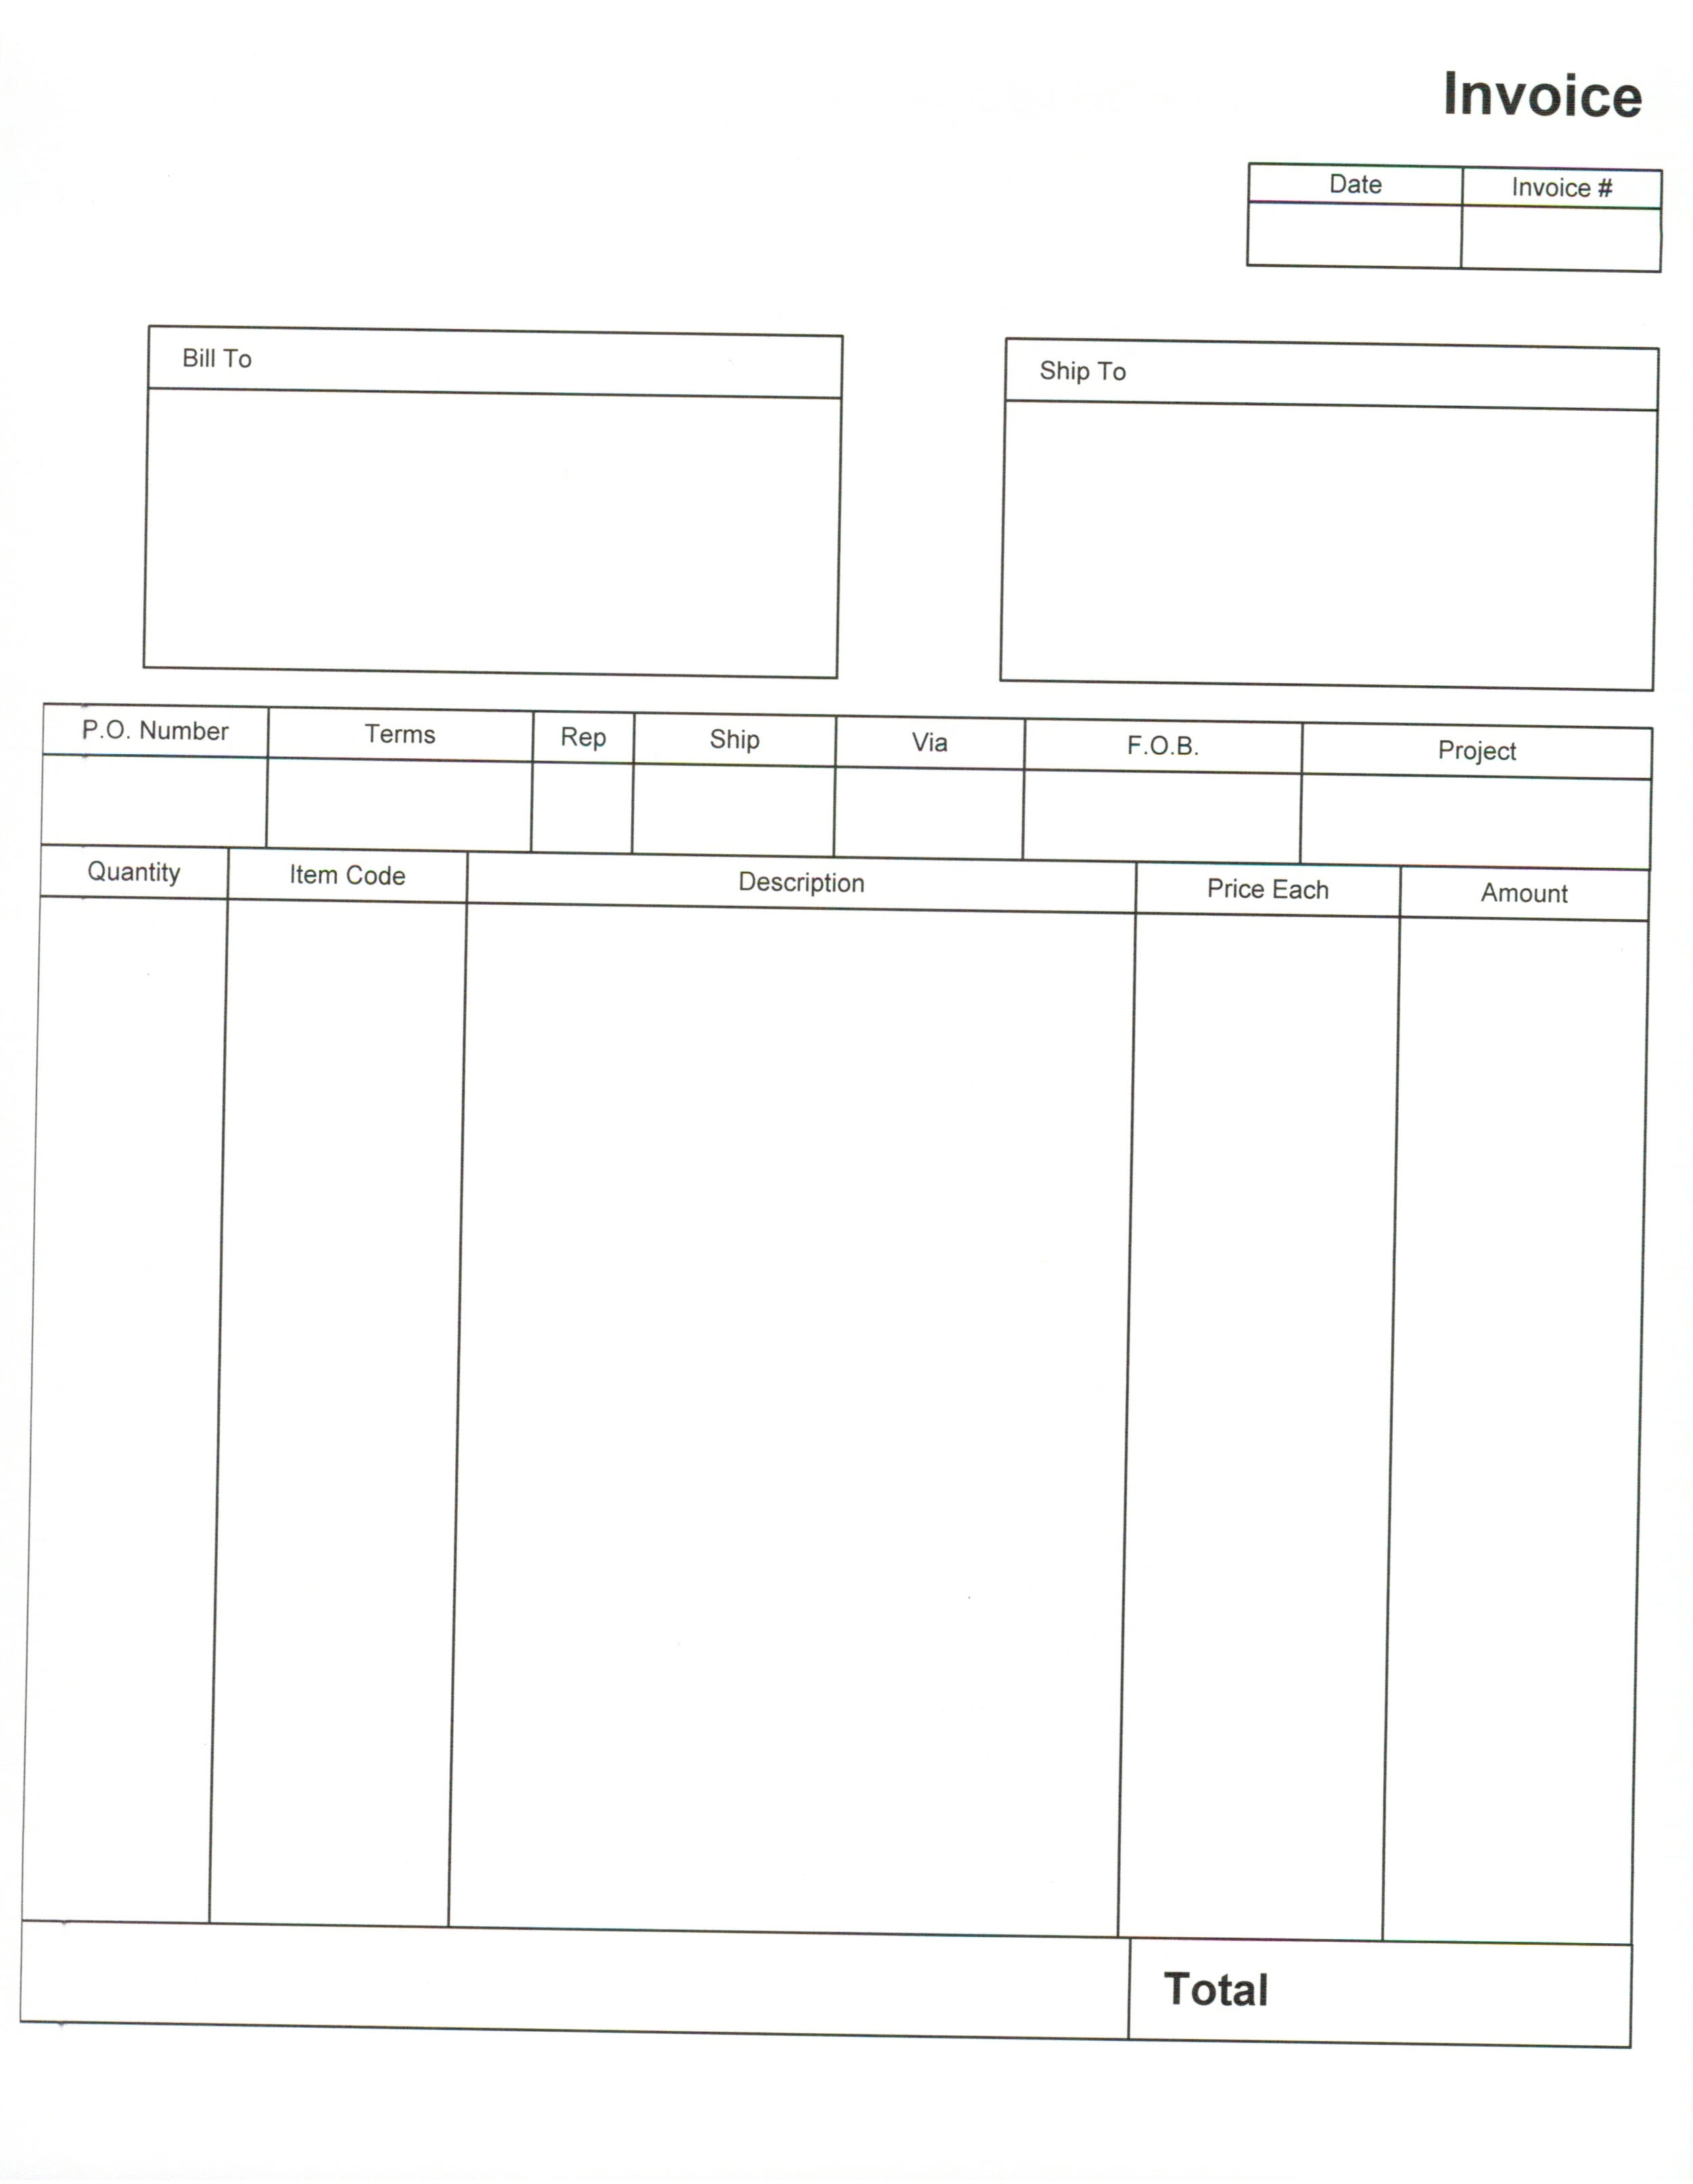 Blank Invoices To Print * Invoice Template Ideas